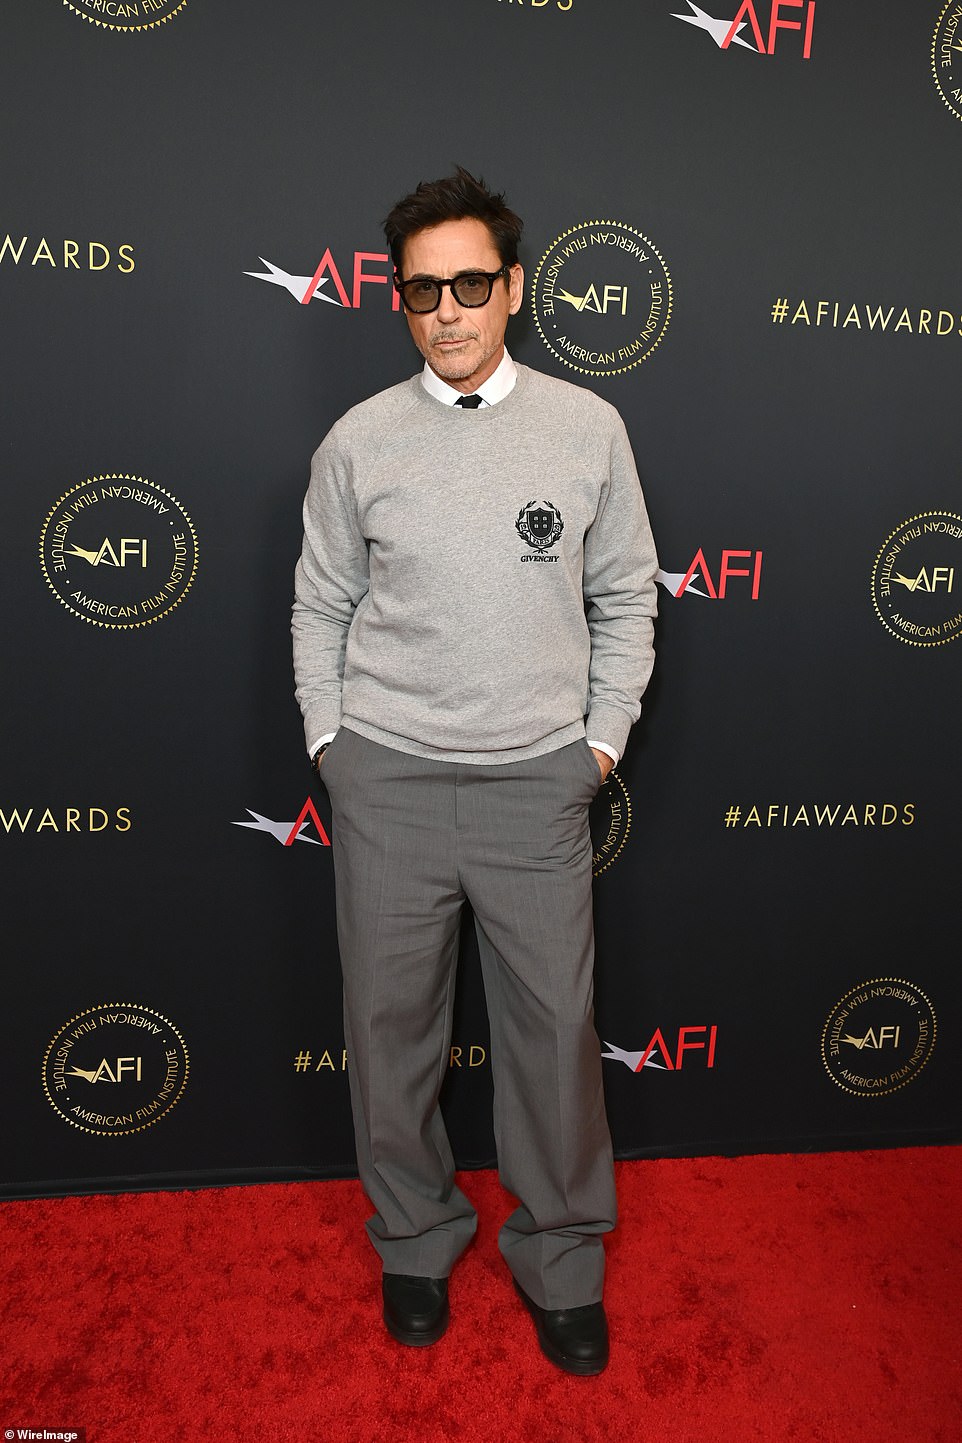 Robert Downey Jr opted for a gray and blue sweater, with gray trousers